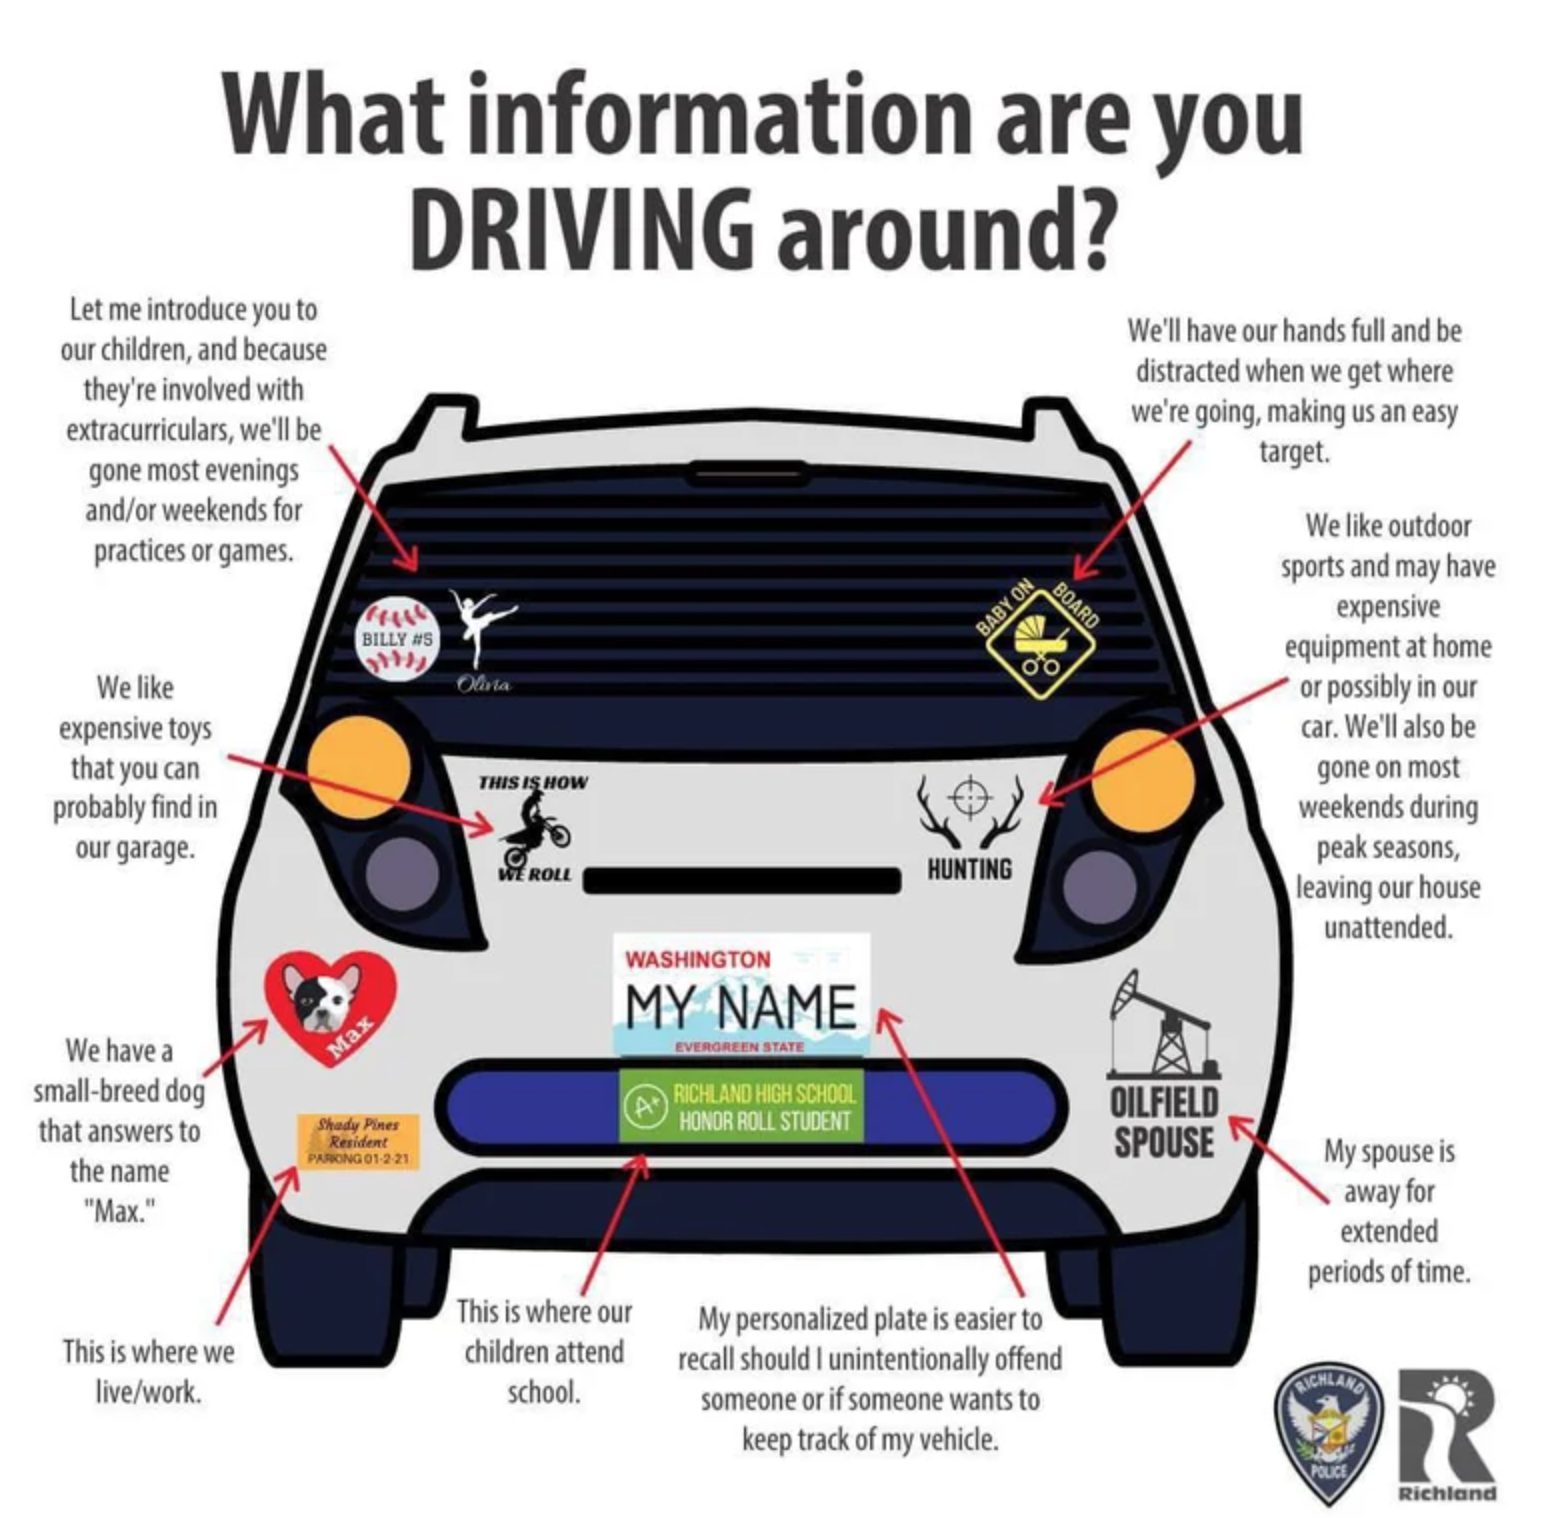 Helpful Guides to life - stickers on cars - What information are you Driving around? Let me introduce you to our children, and because they're involved with extracurriculars, we'll be gone most evenings andor weekends for practices or games 1 Ar We'll hav